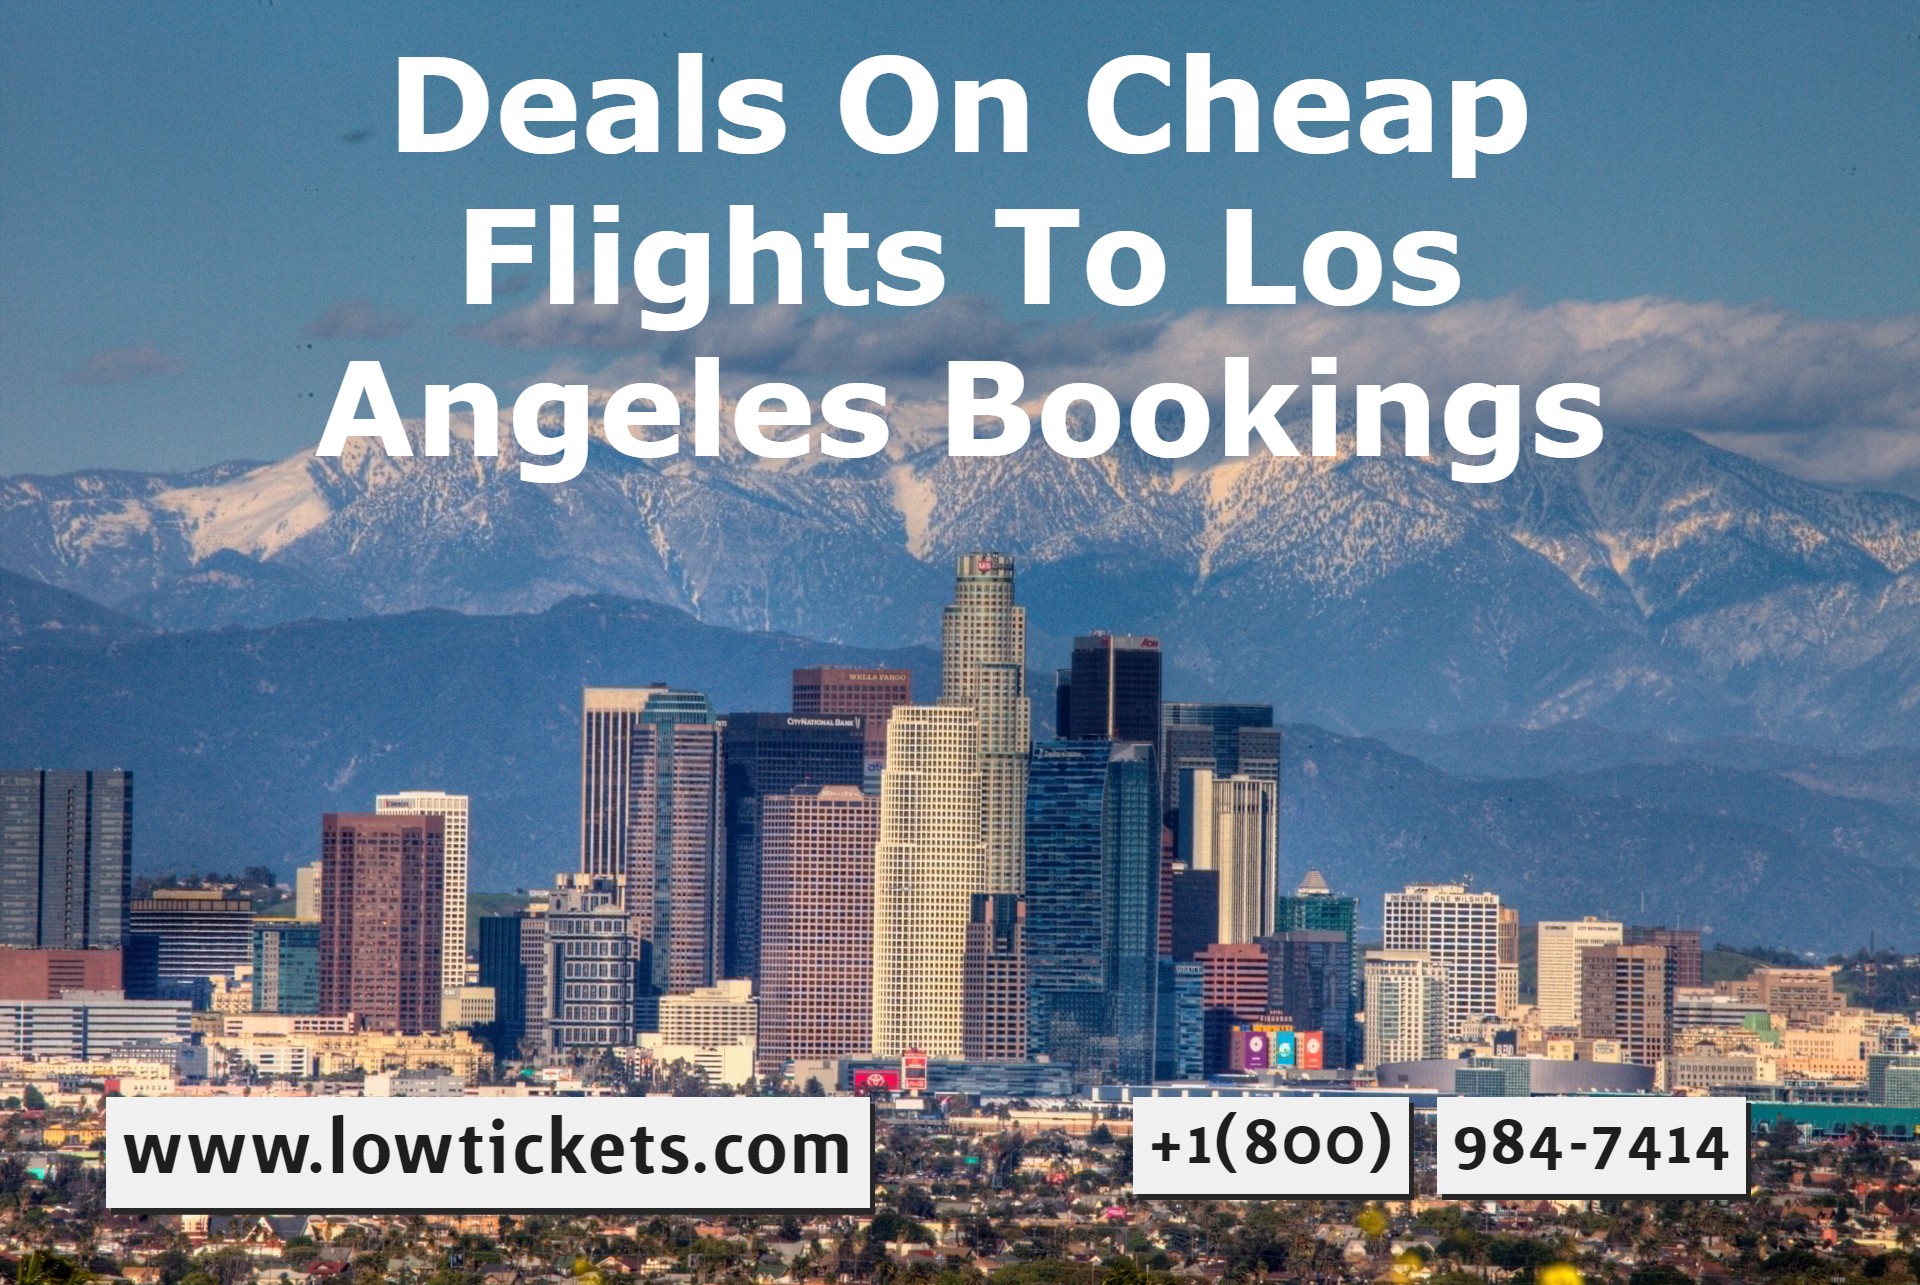 Best Cheap Flights To Los Angeles Bookings, Online Event